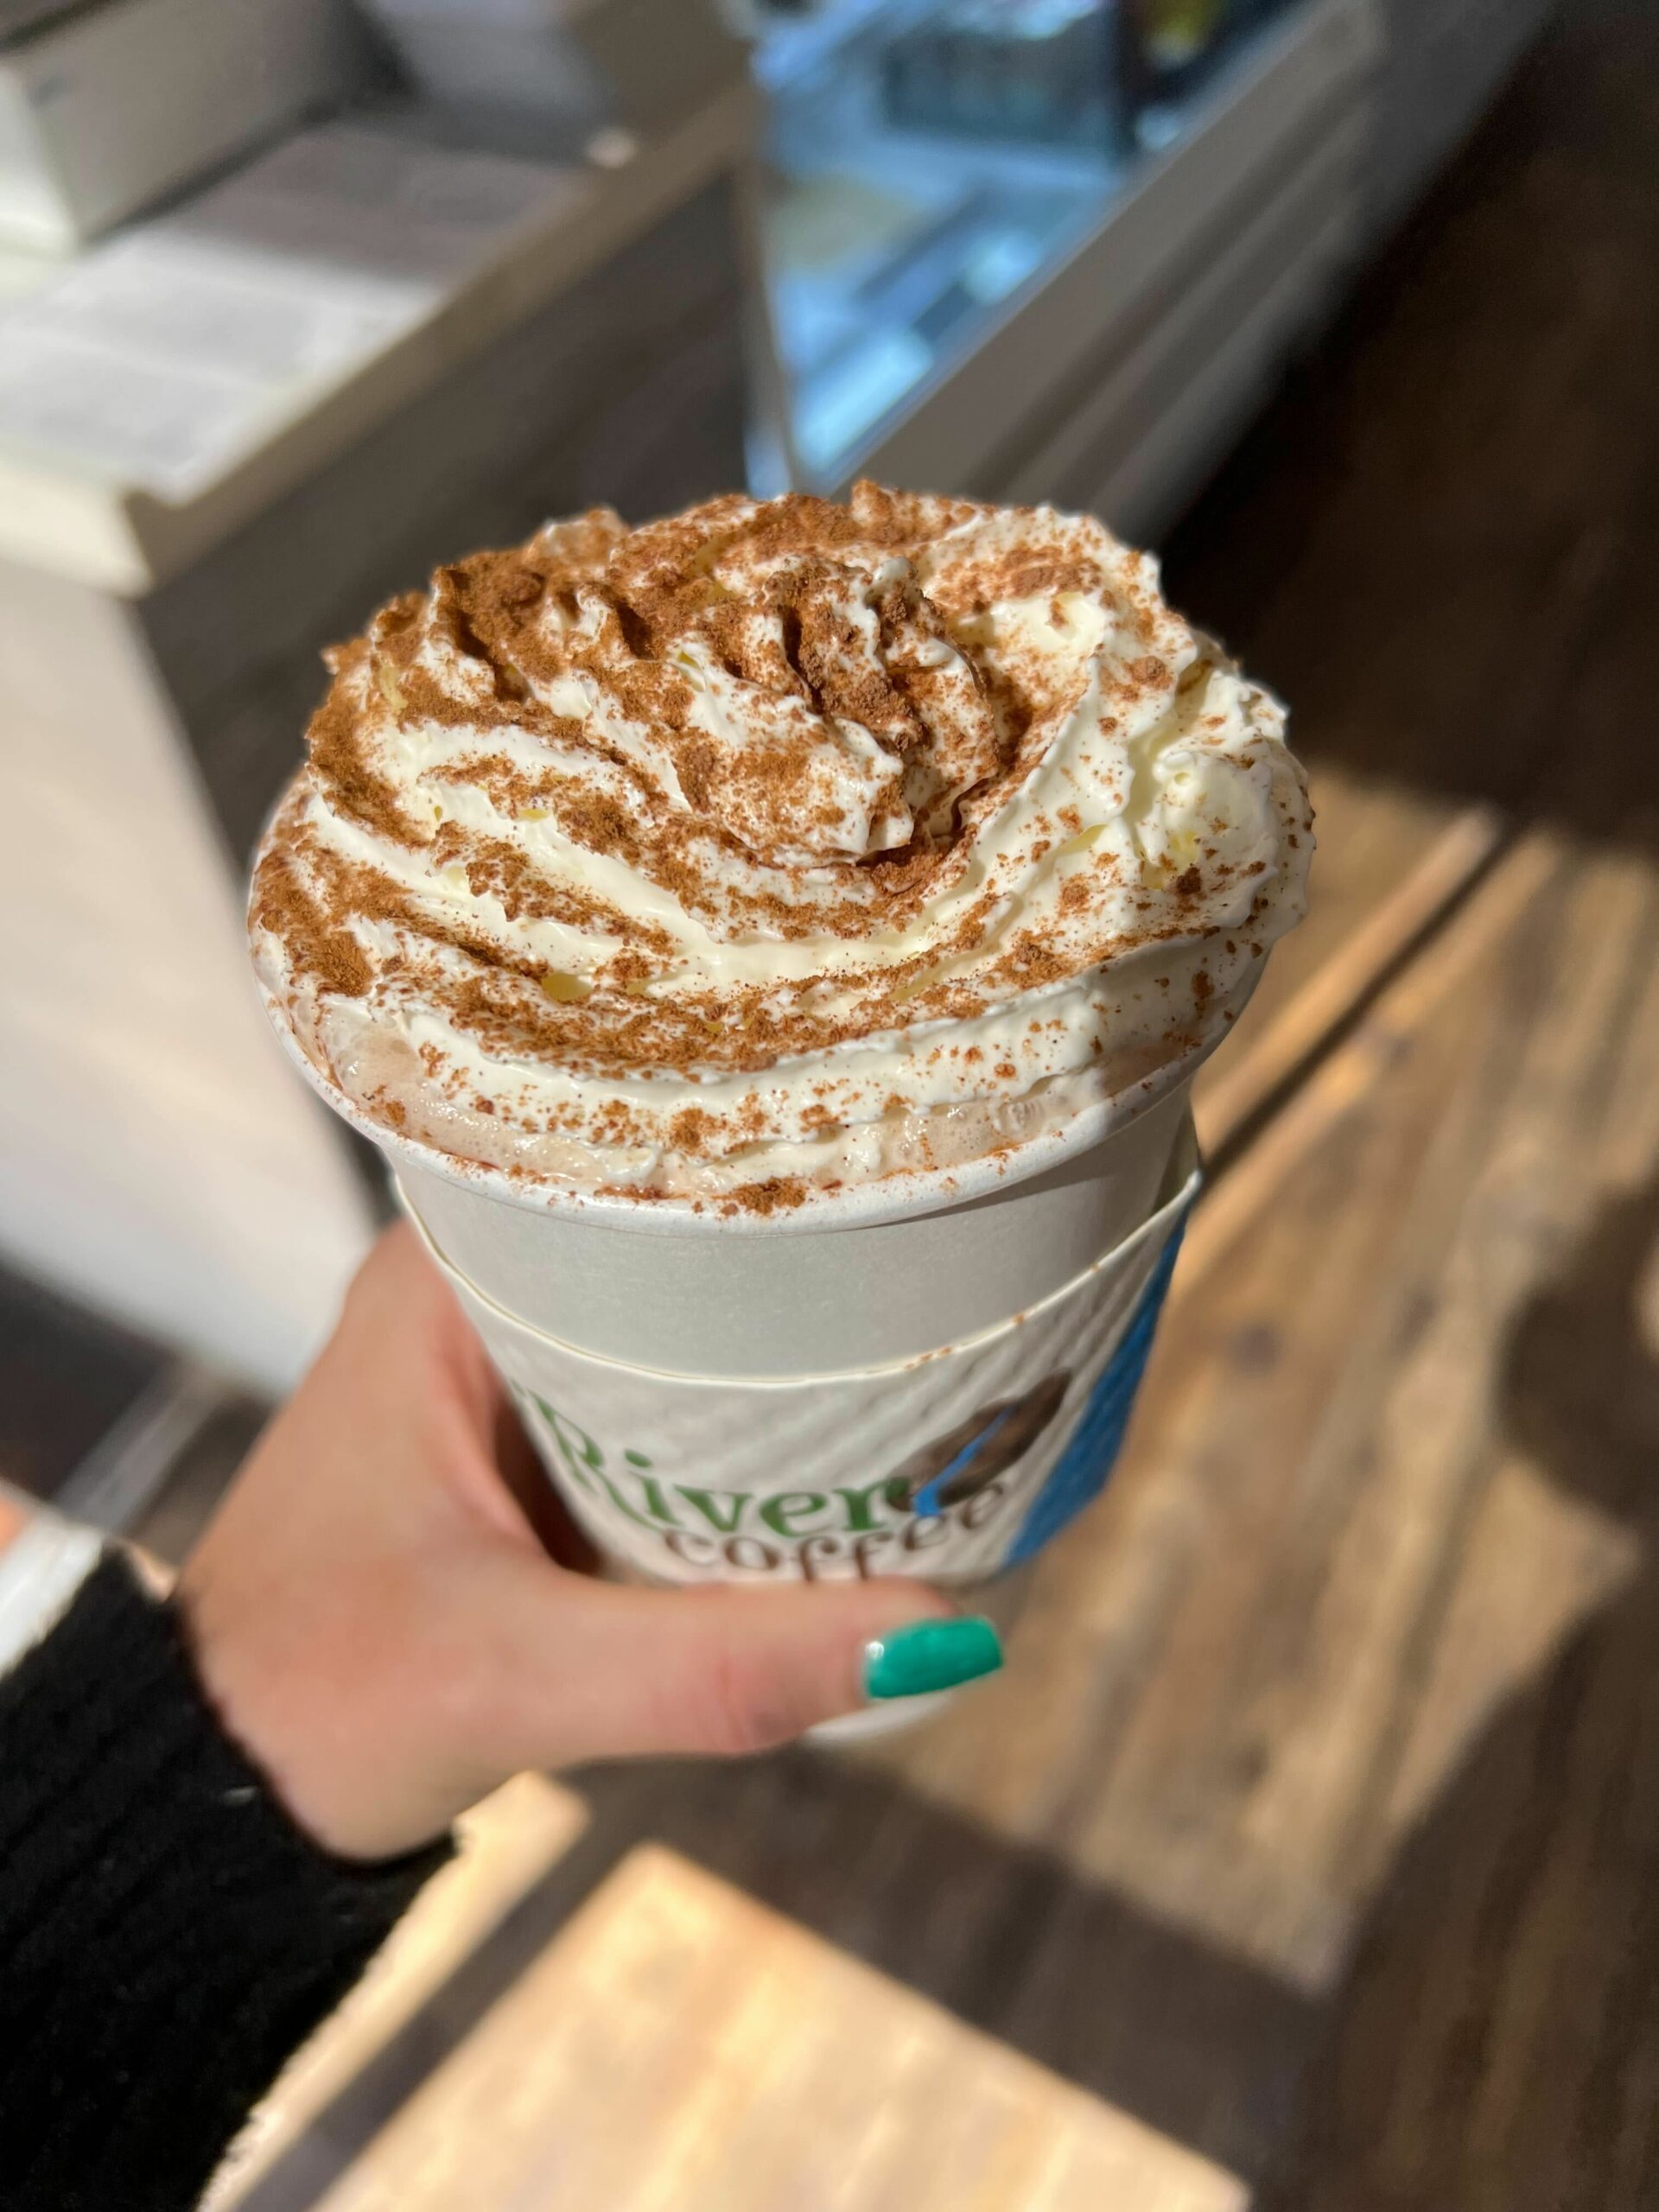 Sweet and spicy, Big River Coffee brews a tasty pumpkin chocolate chai latte, topped with whipped cream and cinnamon. (Lonnie Hayes)